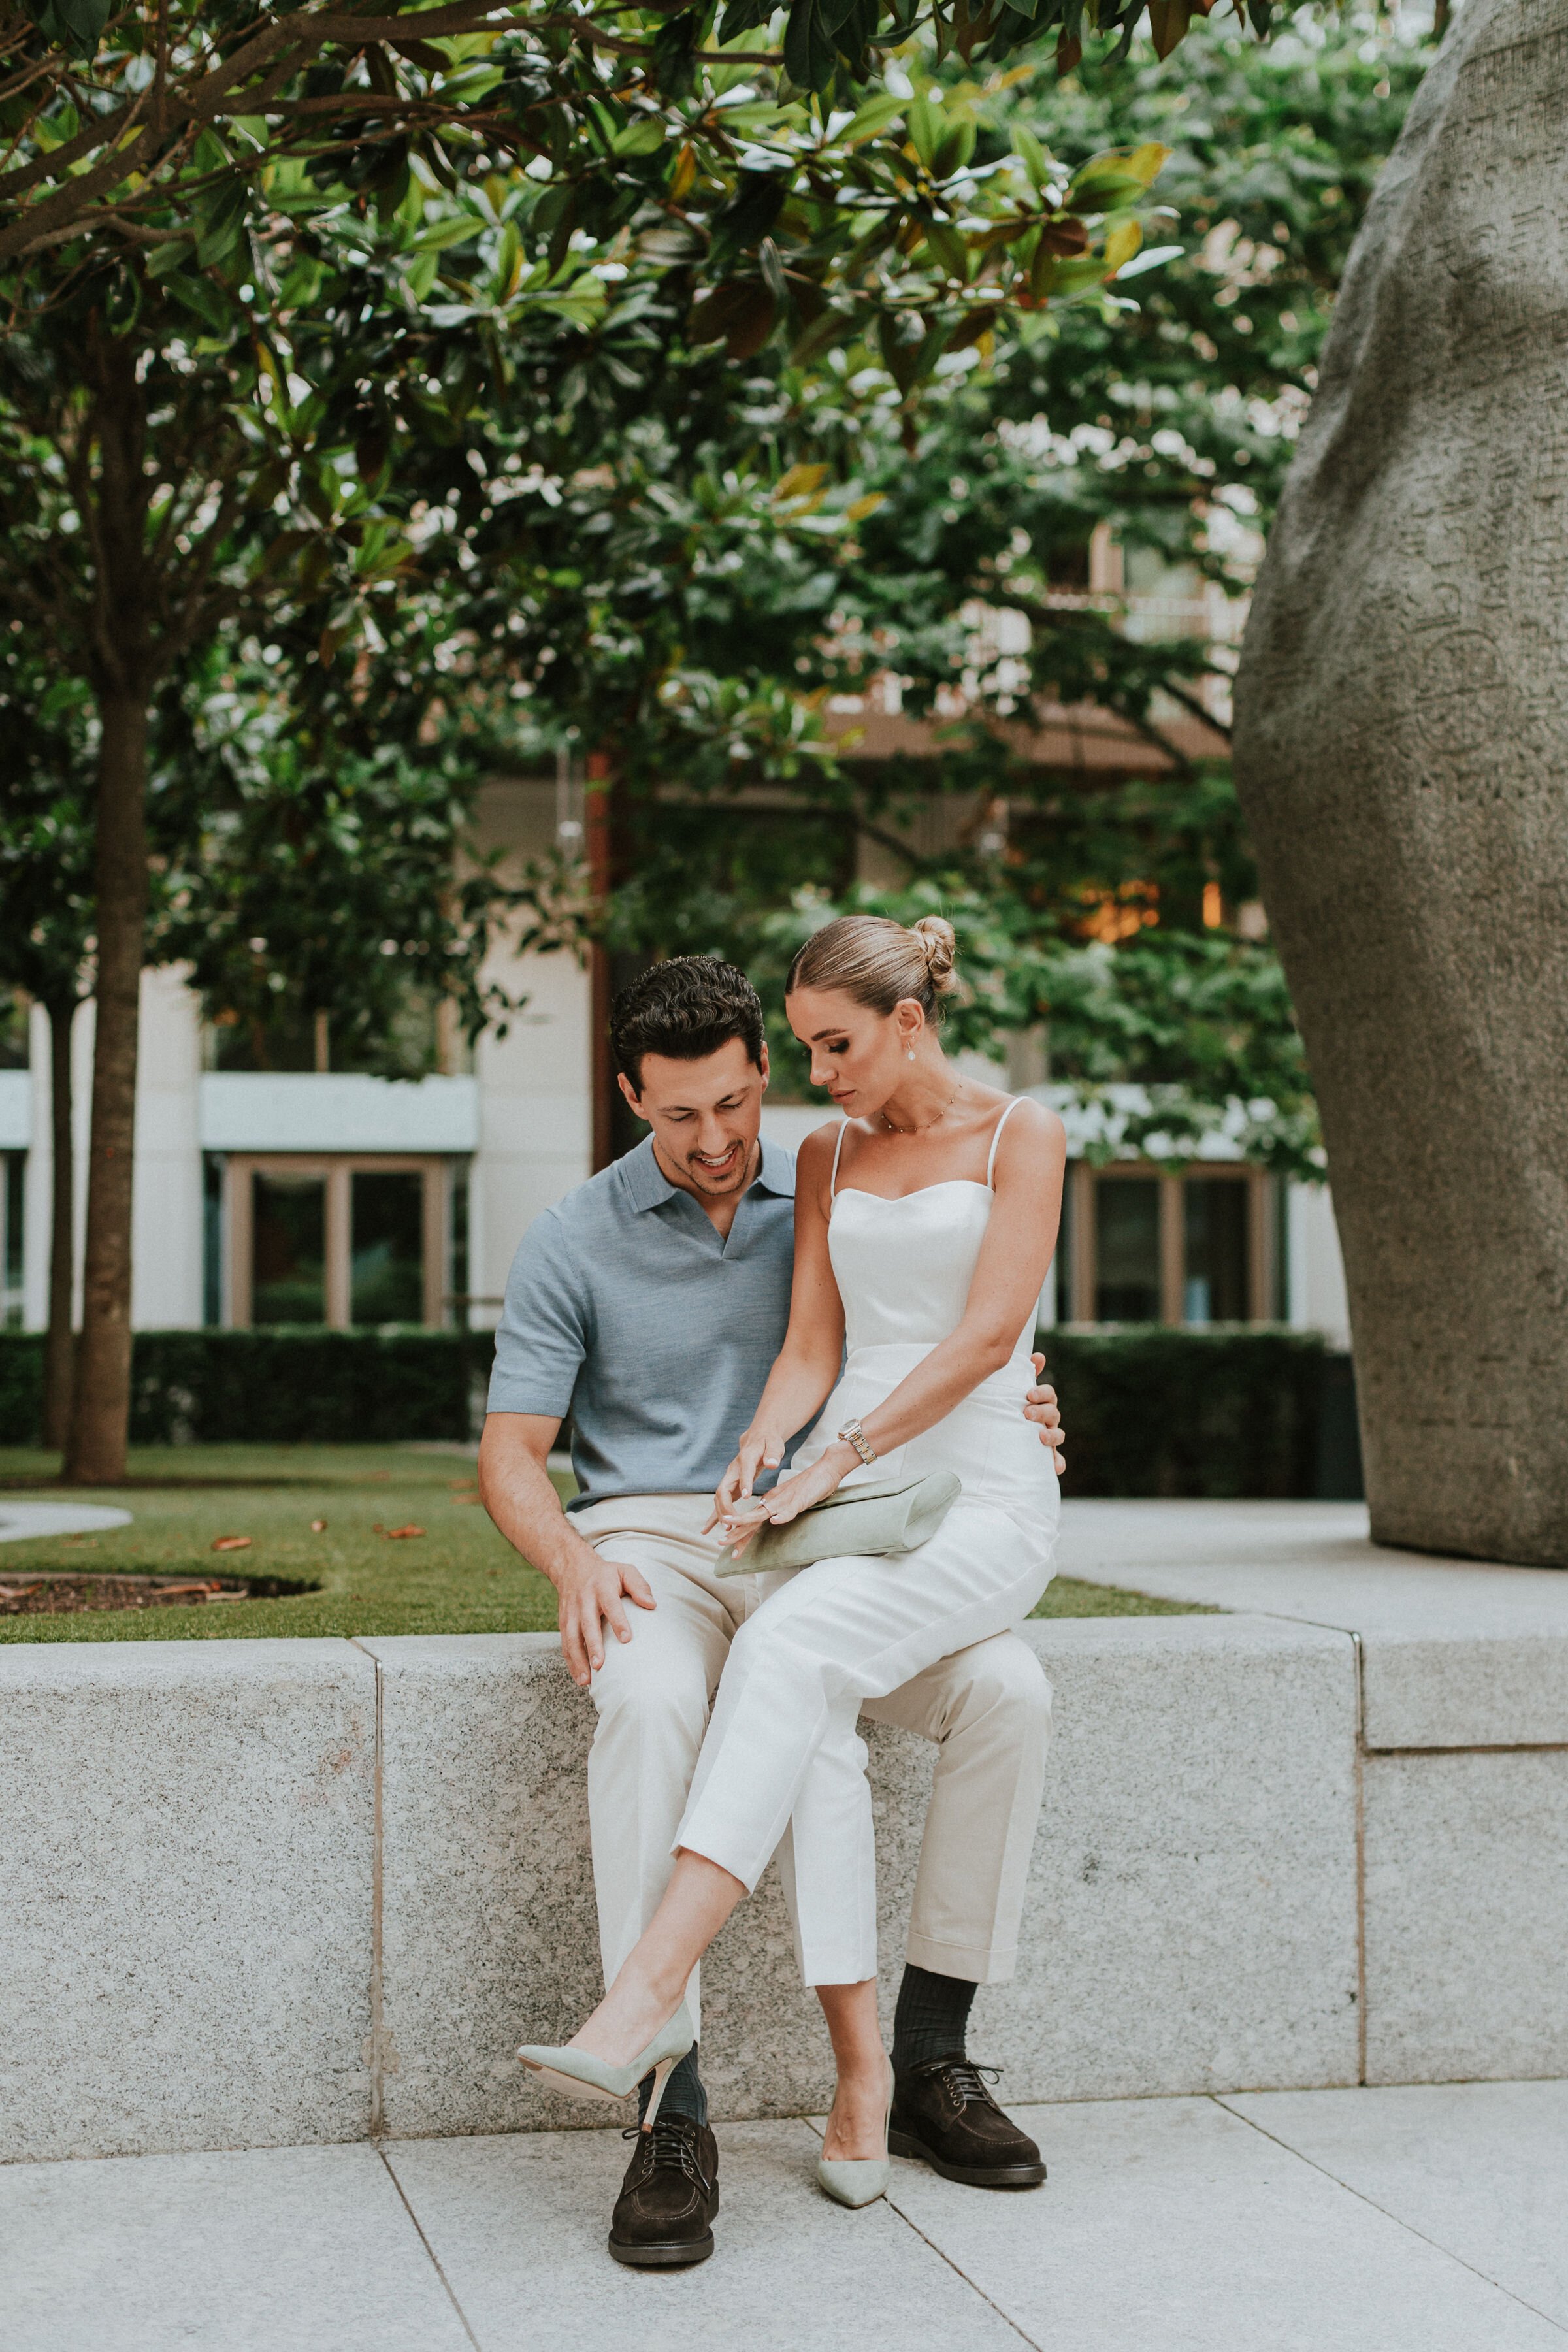 Beautiful bride Leilah wore wedding separates - trousers and a top - from Halfpenny London